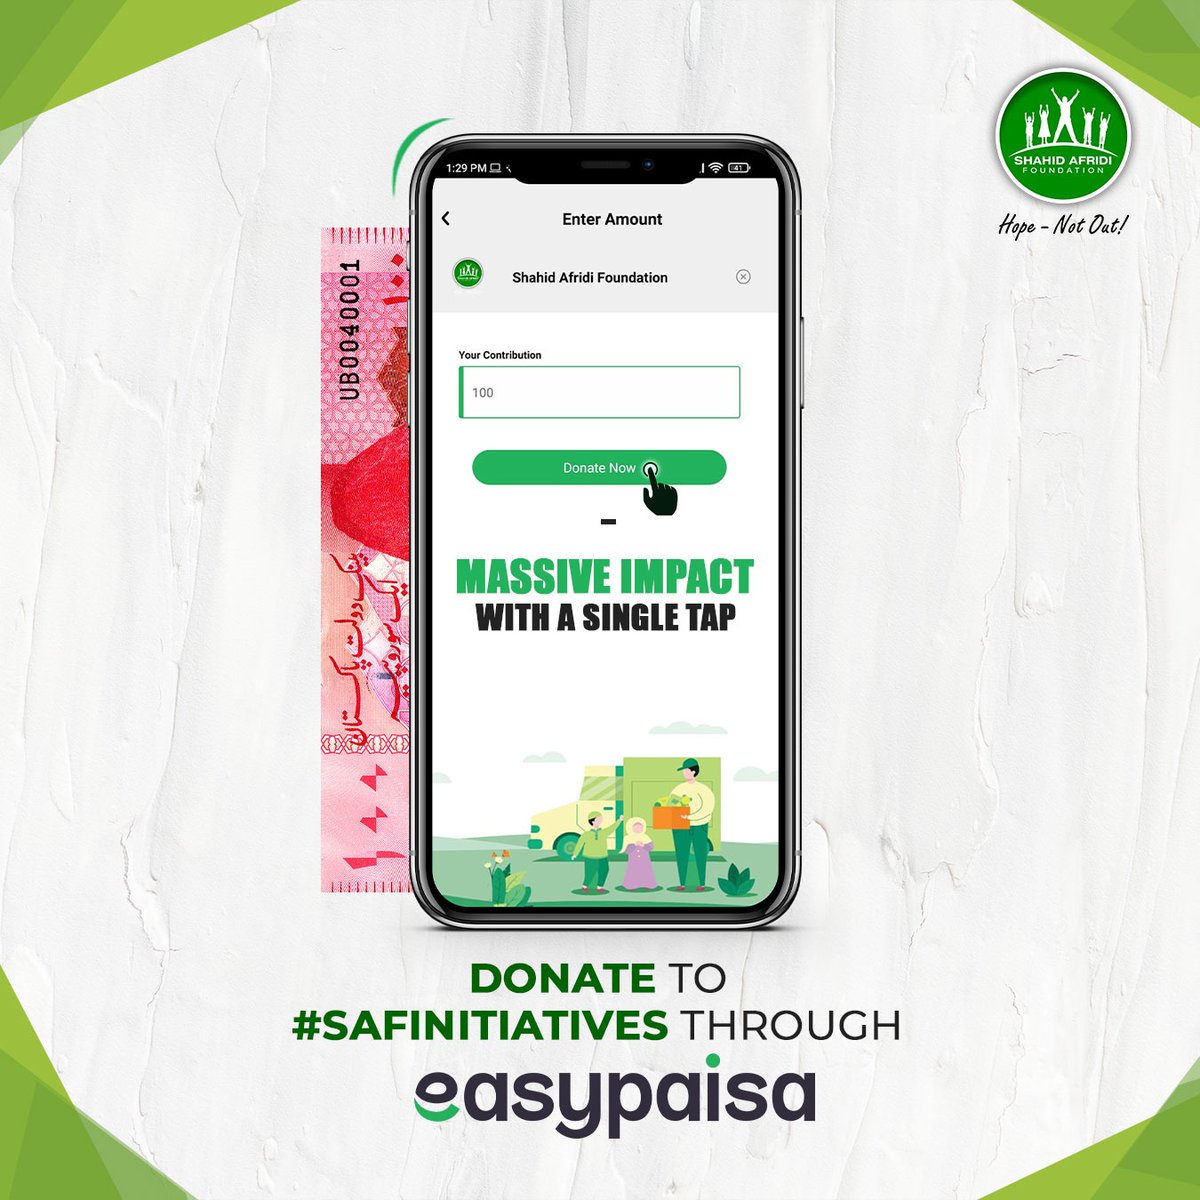 Let's come together for the cause of Hope! Donate to #SAFinitiatives with @easypaisa conveniently and do your part in uplifting underserved households. 
#HopeNotOut